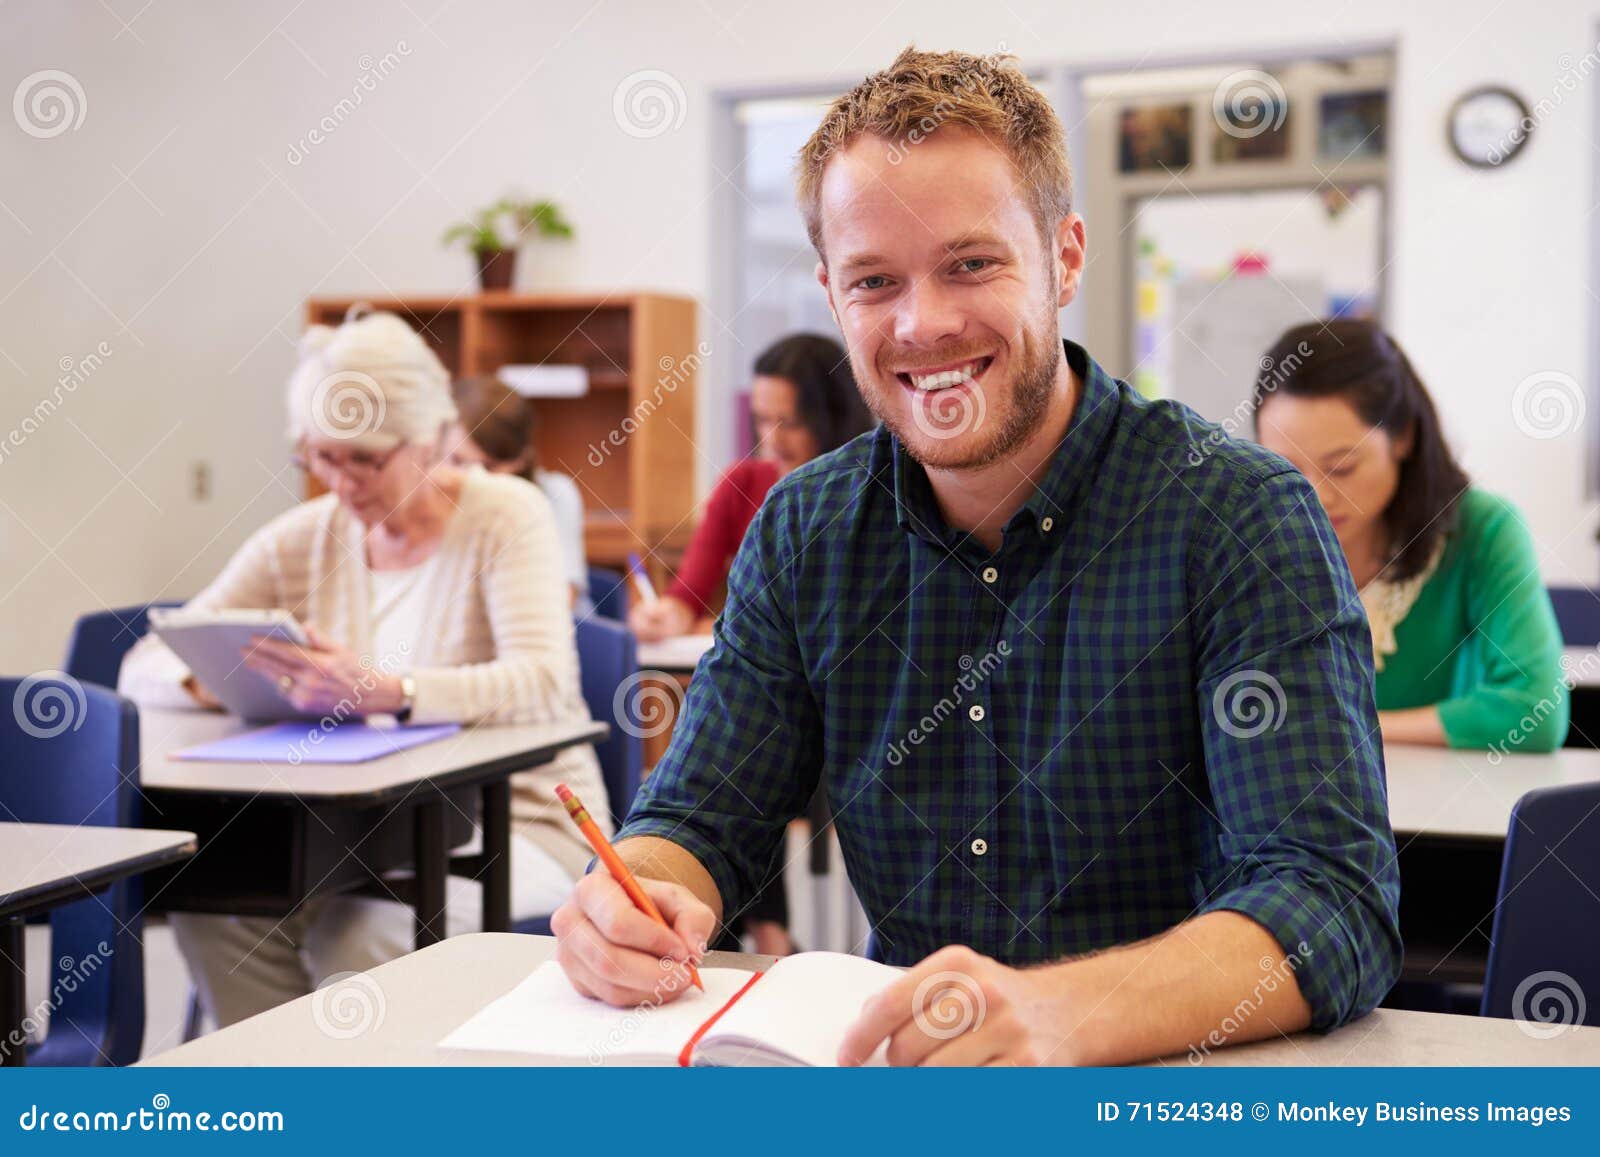 young man at an adult education class looking to camera